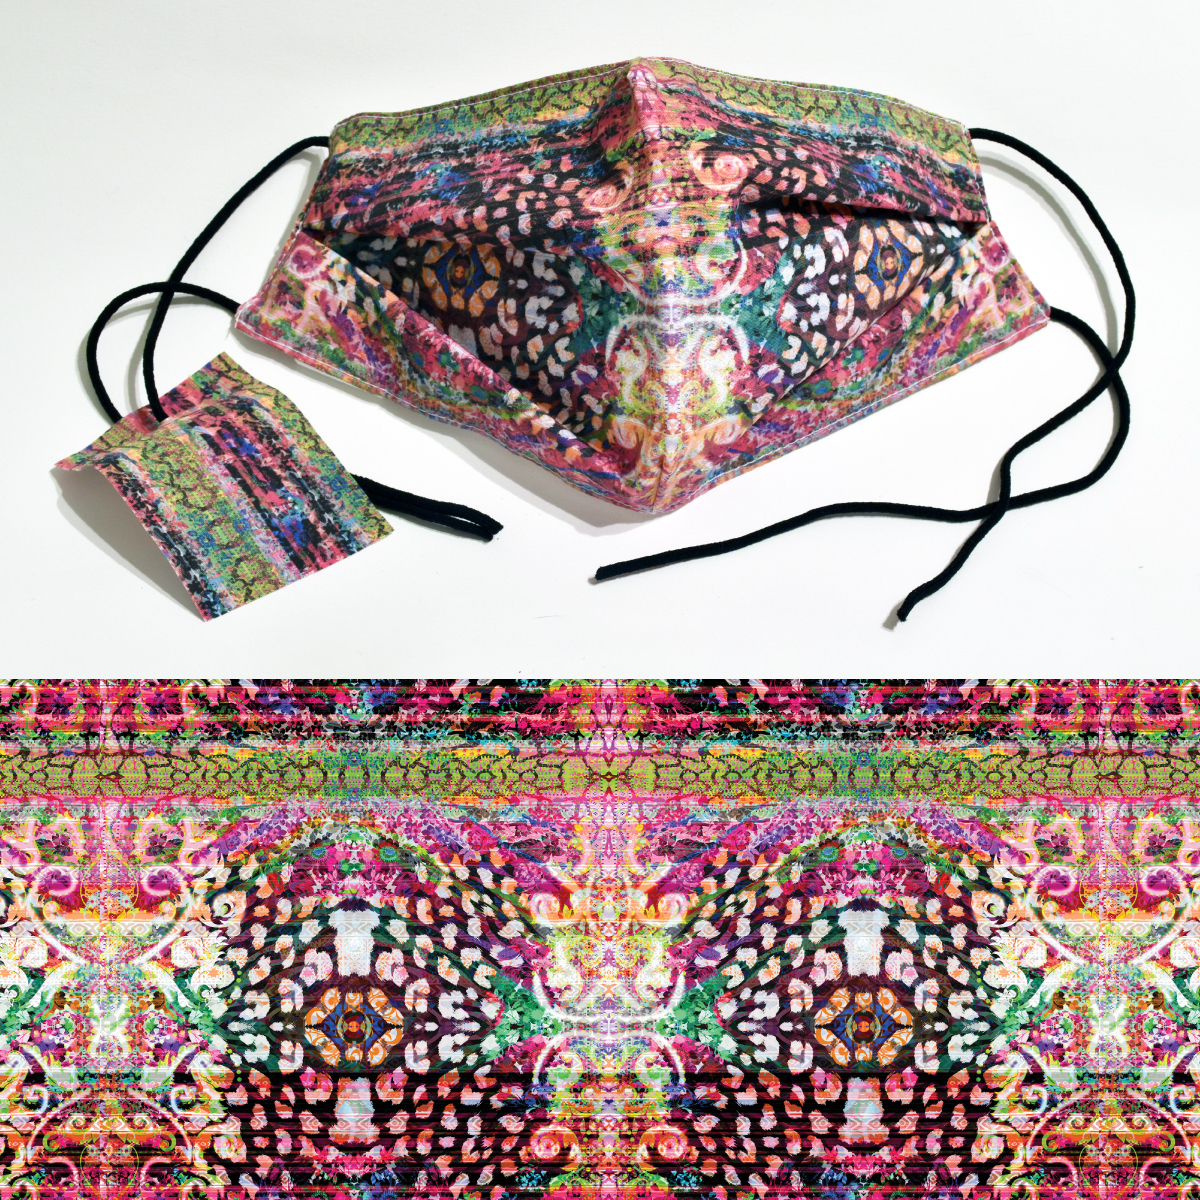 Photo of a fabric mask above a detail image of the fabric pattern, an intricate and multicolored repeating design.